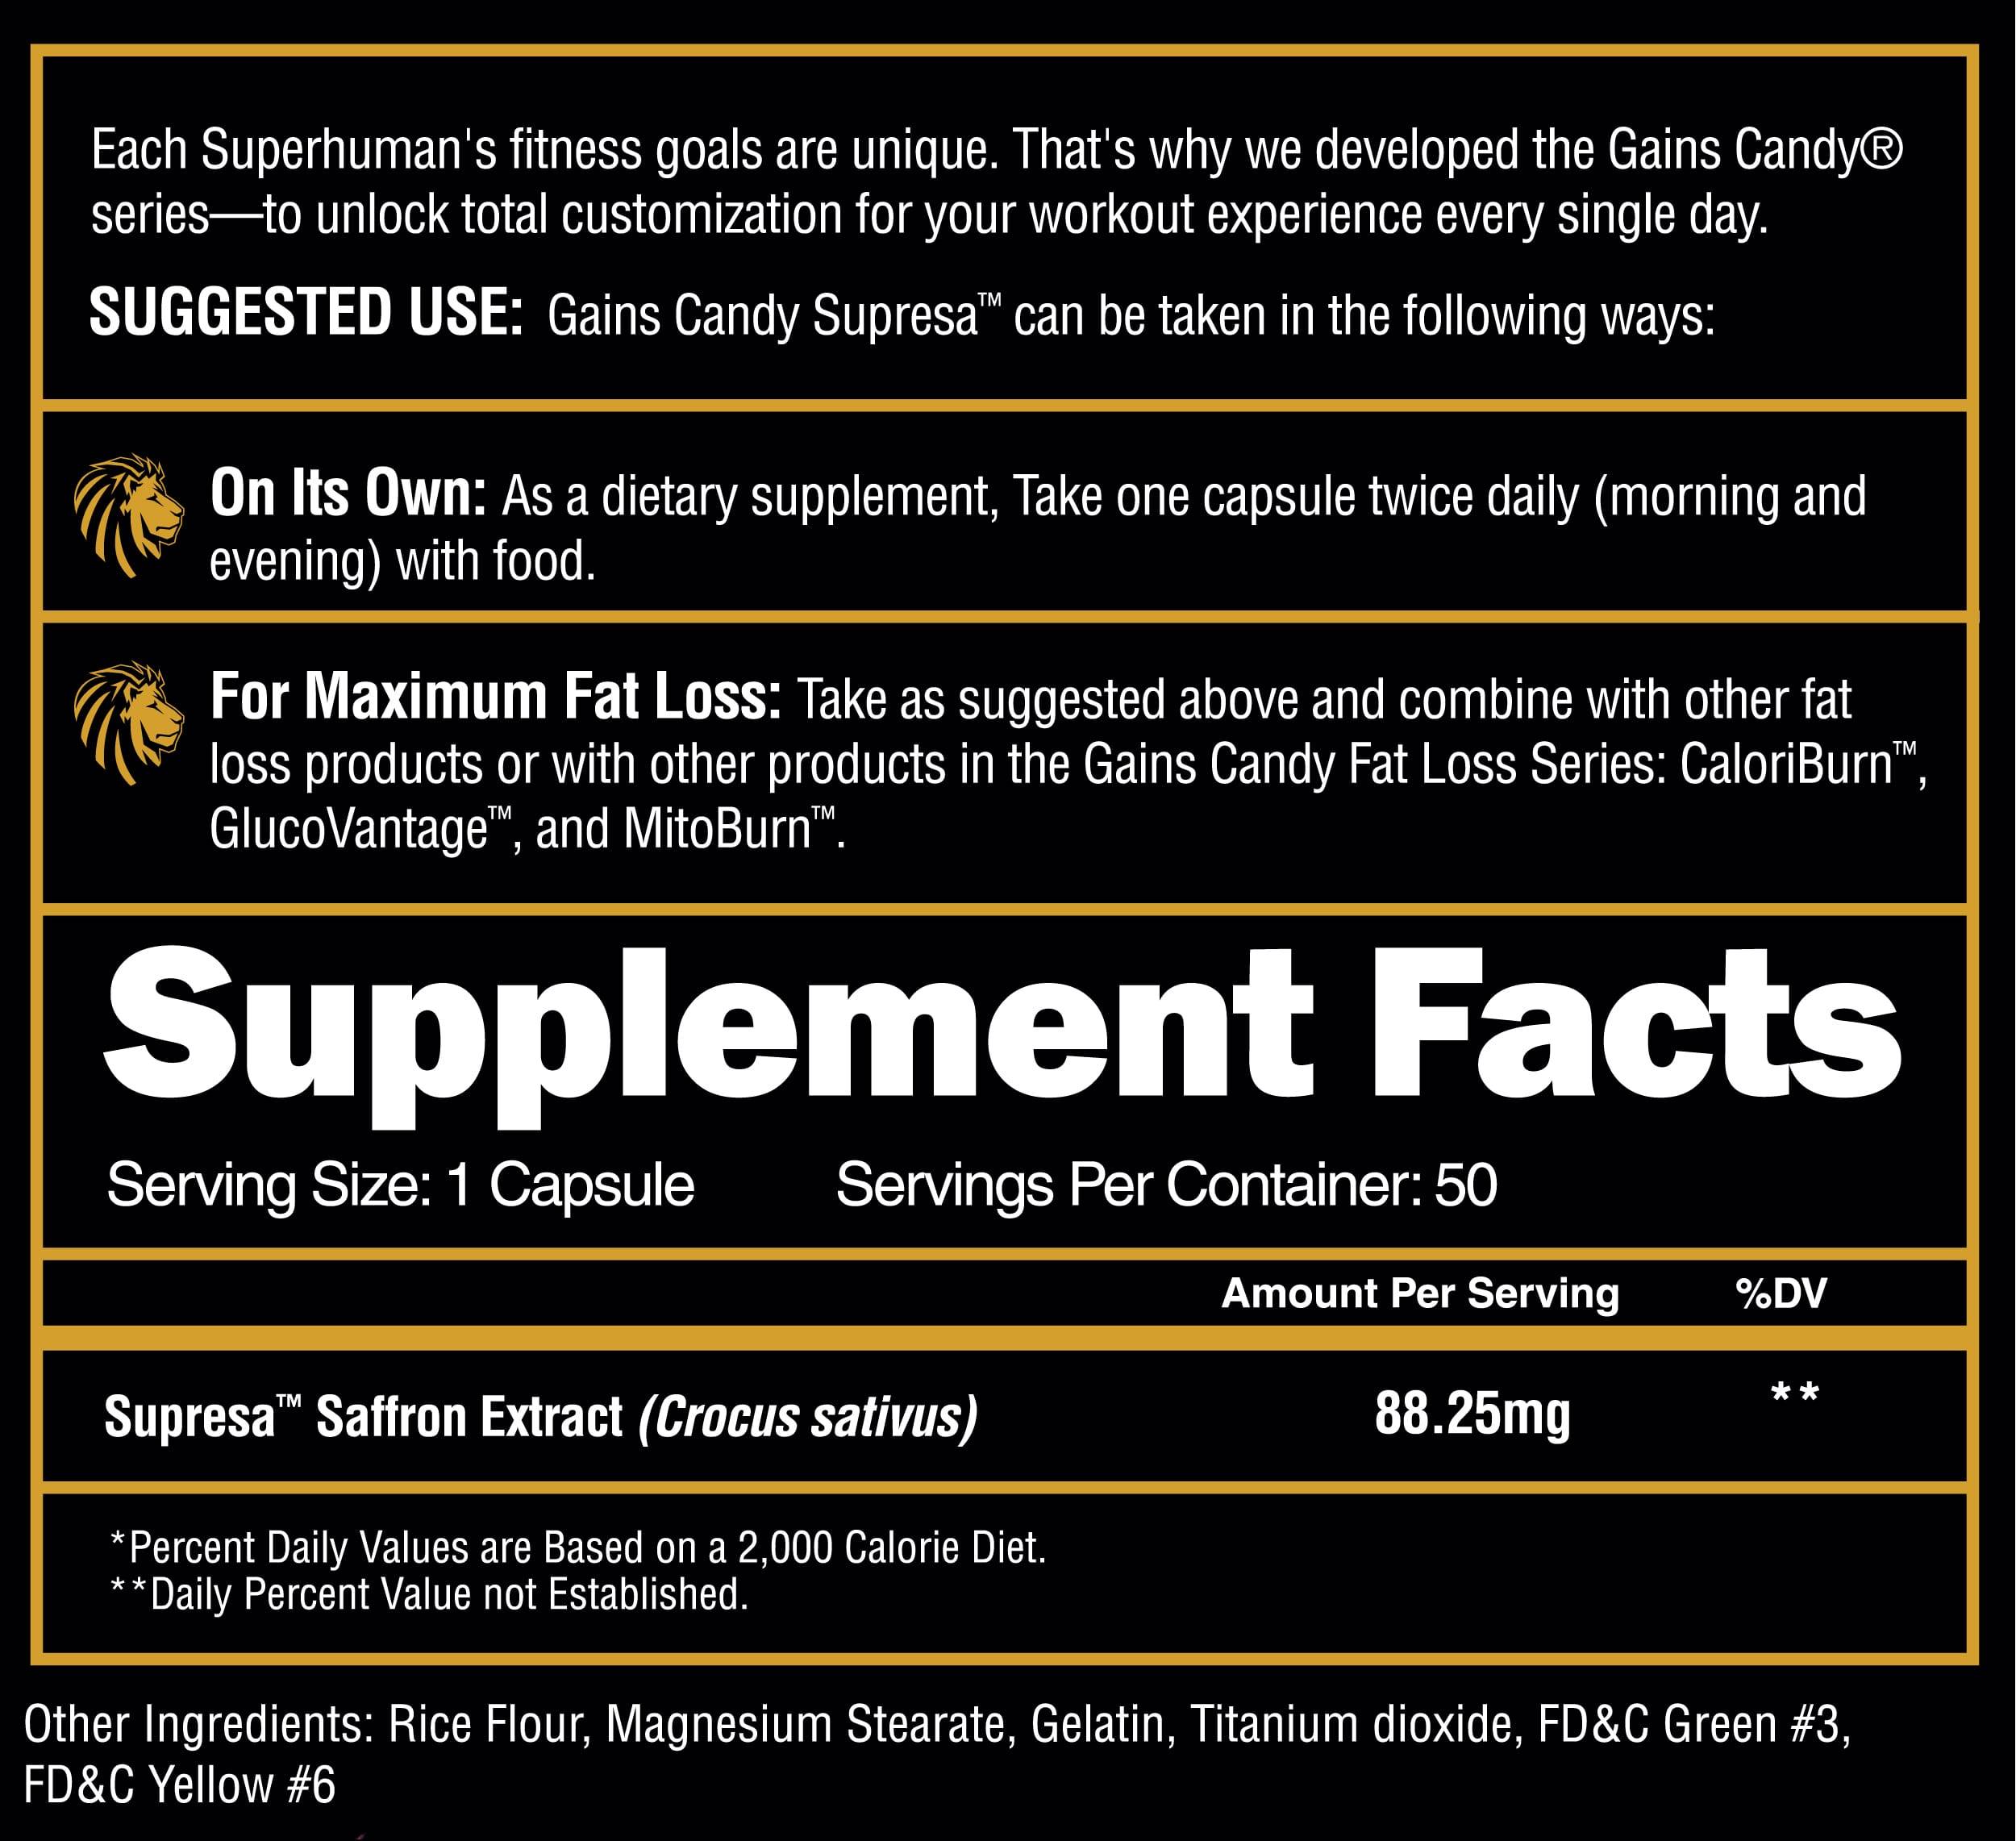 Supp Facts